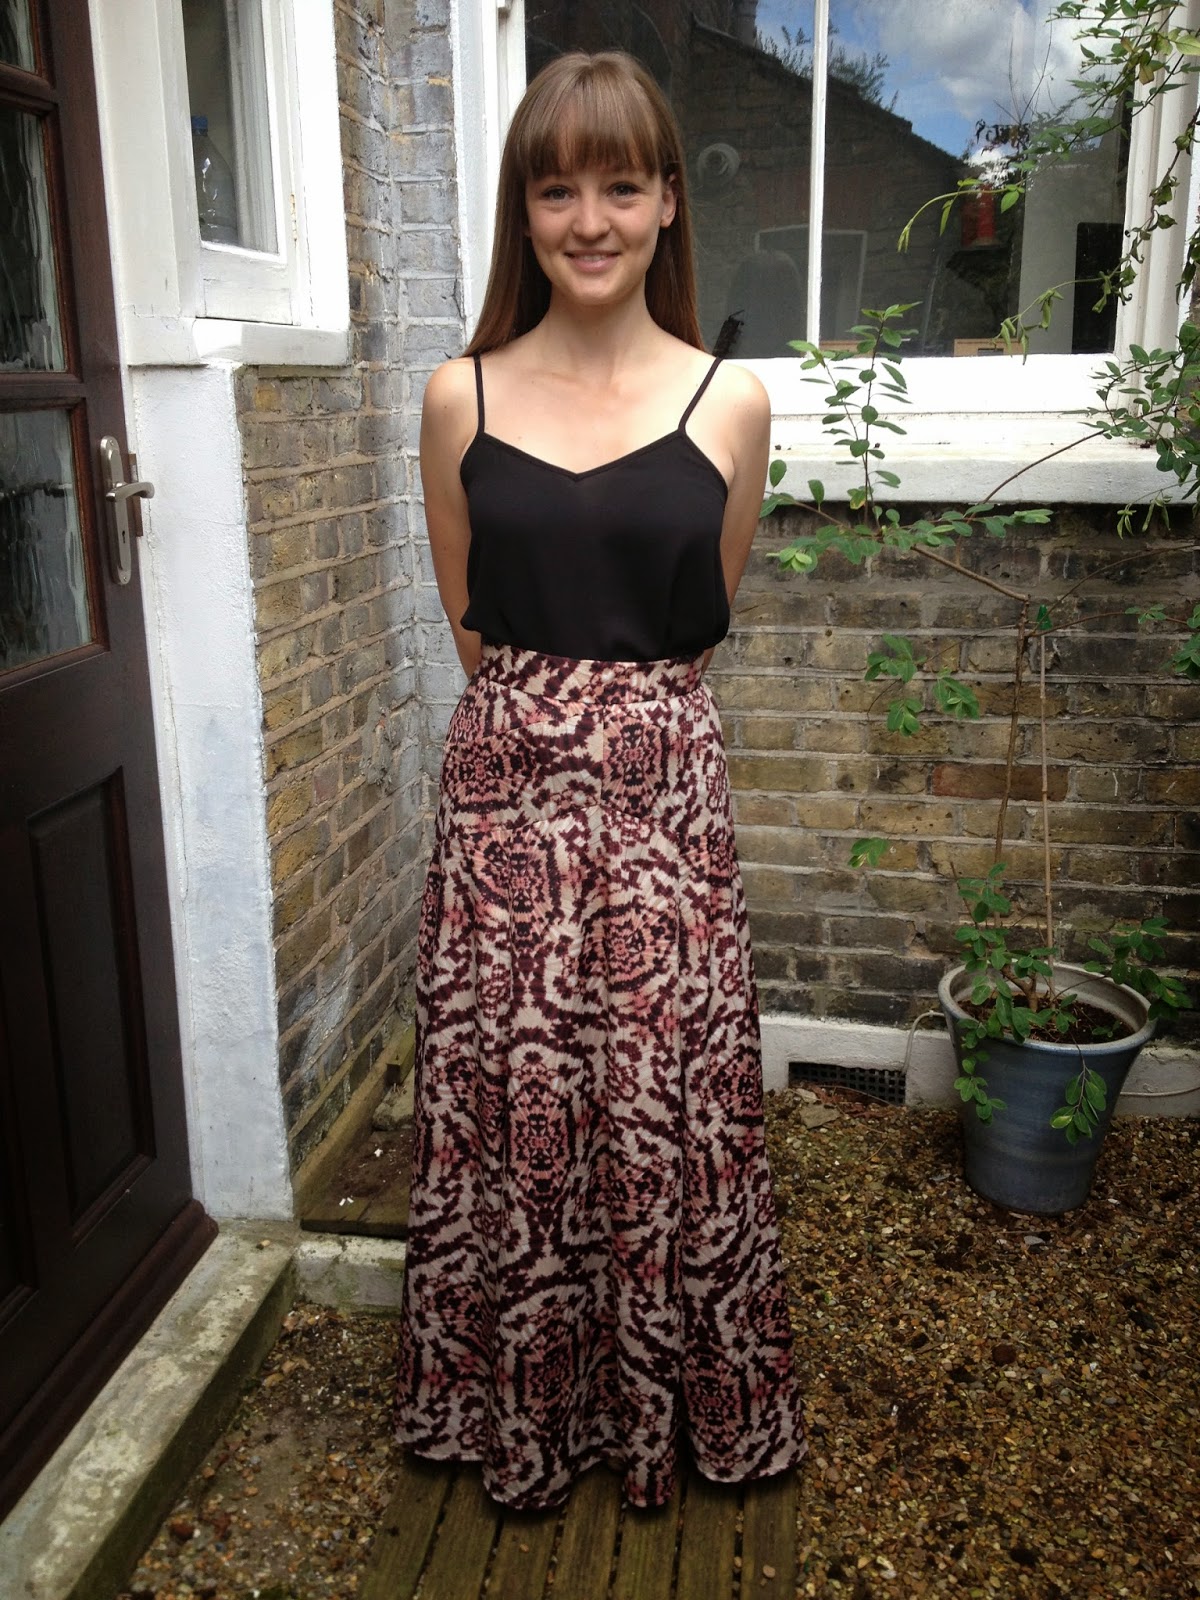 Diary of a Chainstitcher: Tie-Dye Gabriola Maxi Skirt from Sewaholic Patterns